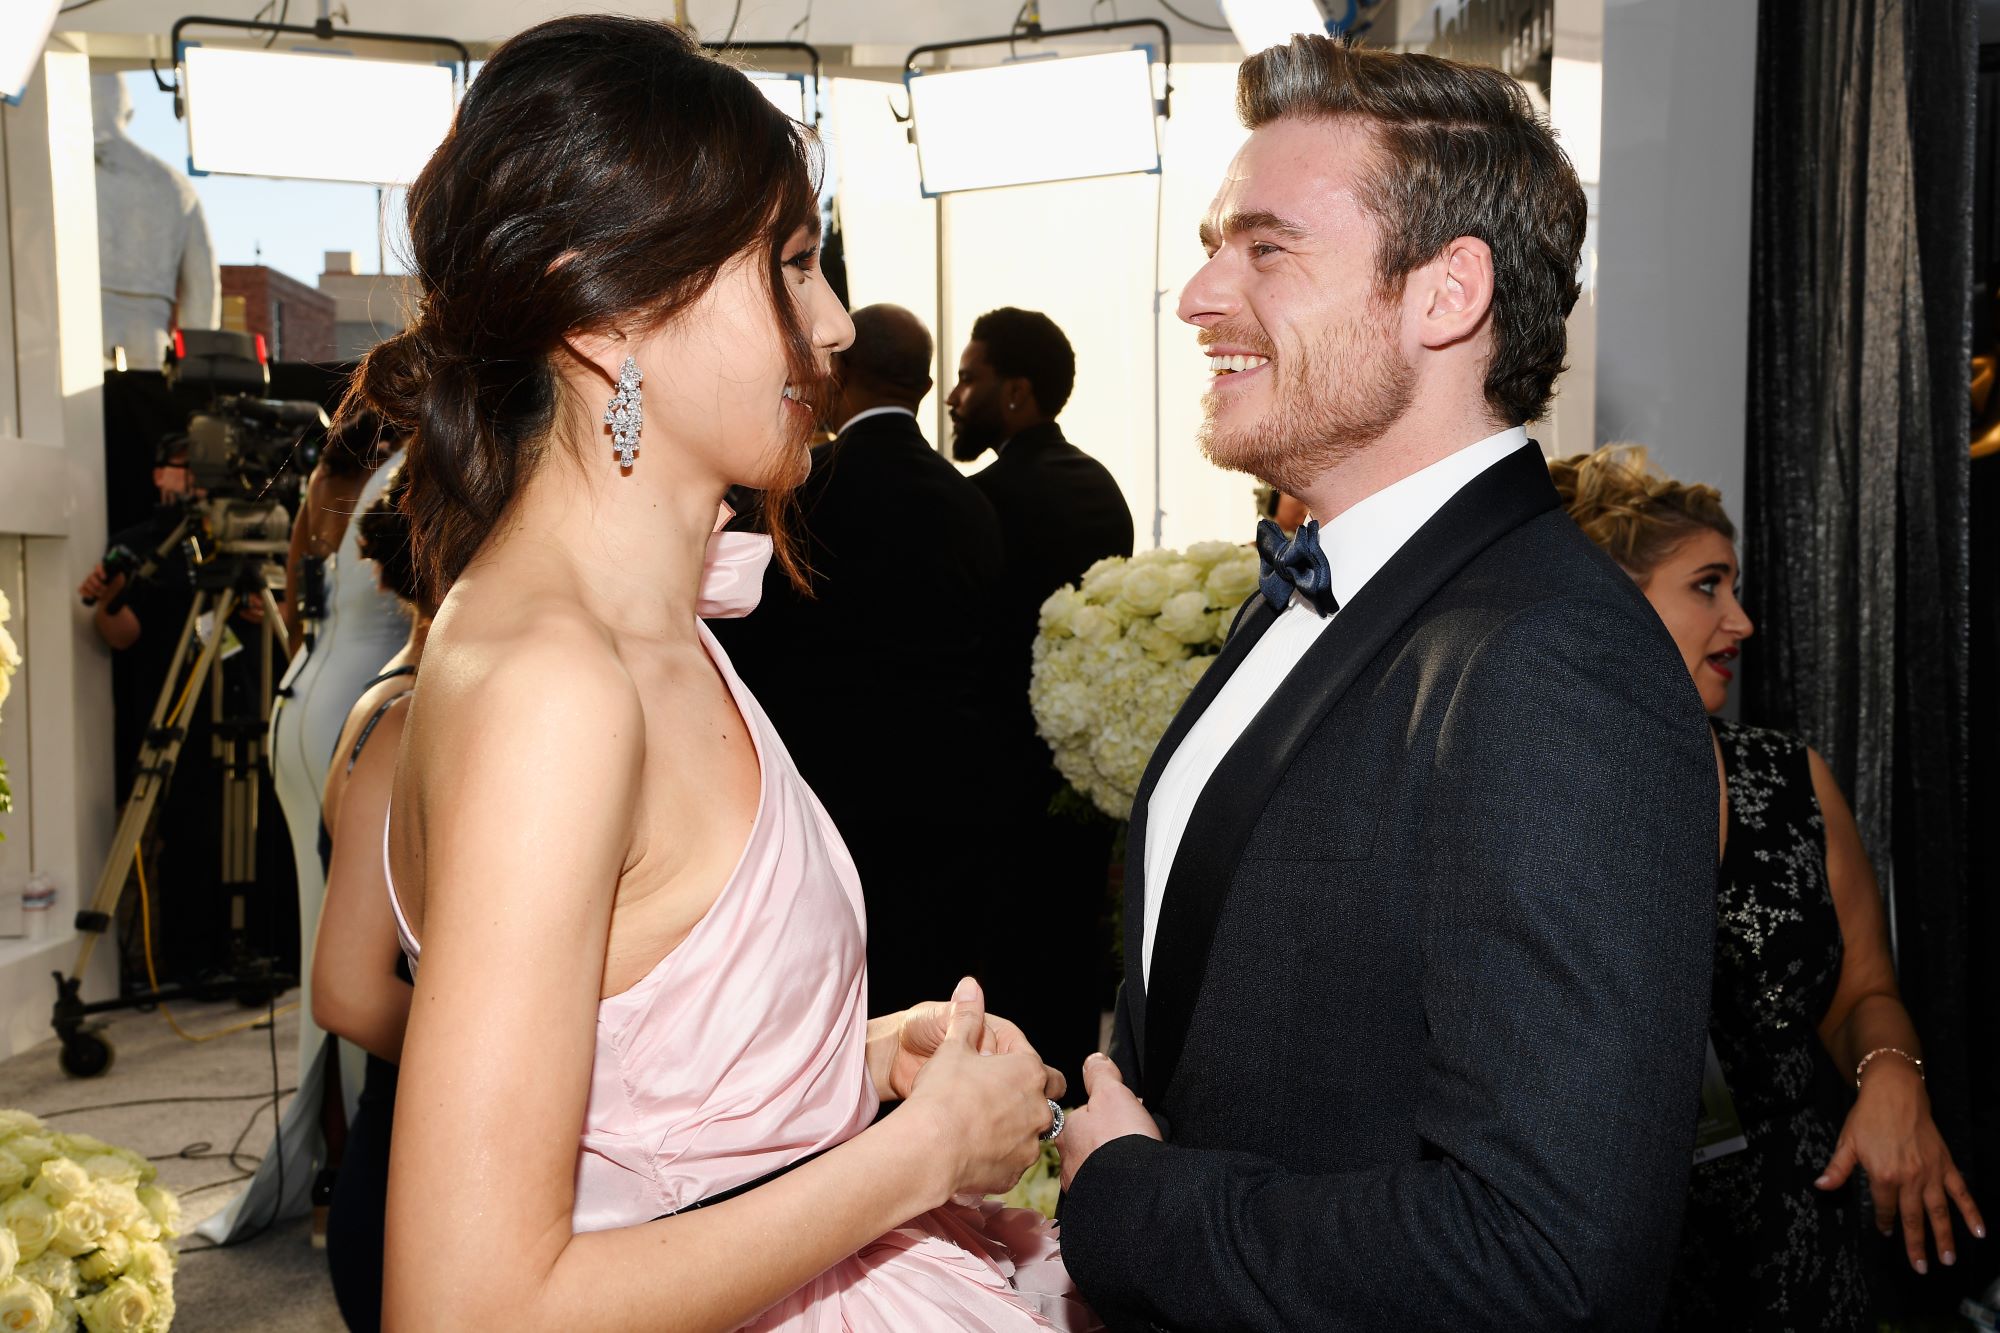 Marvel's 'Eternals' stars Gemma Chan and Richard Madden talk on the red carpet. Chan wears a light pink, one-shoulder dress and dangly earrings. Madden wears a black suit over a white button-up shirt and a black bow tie.